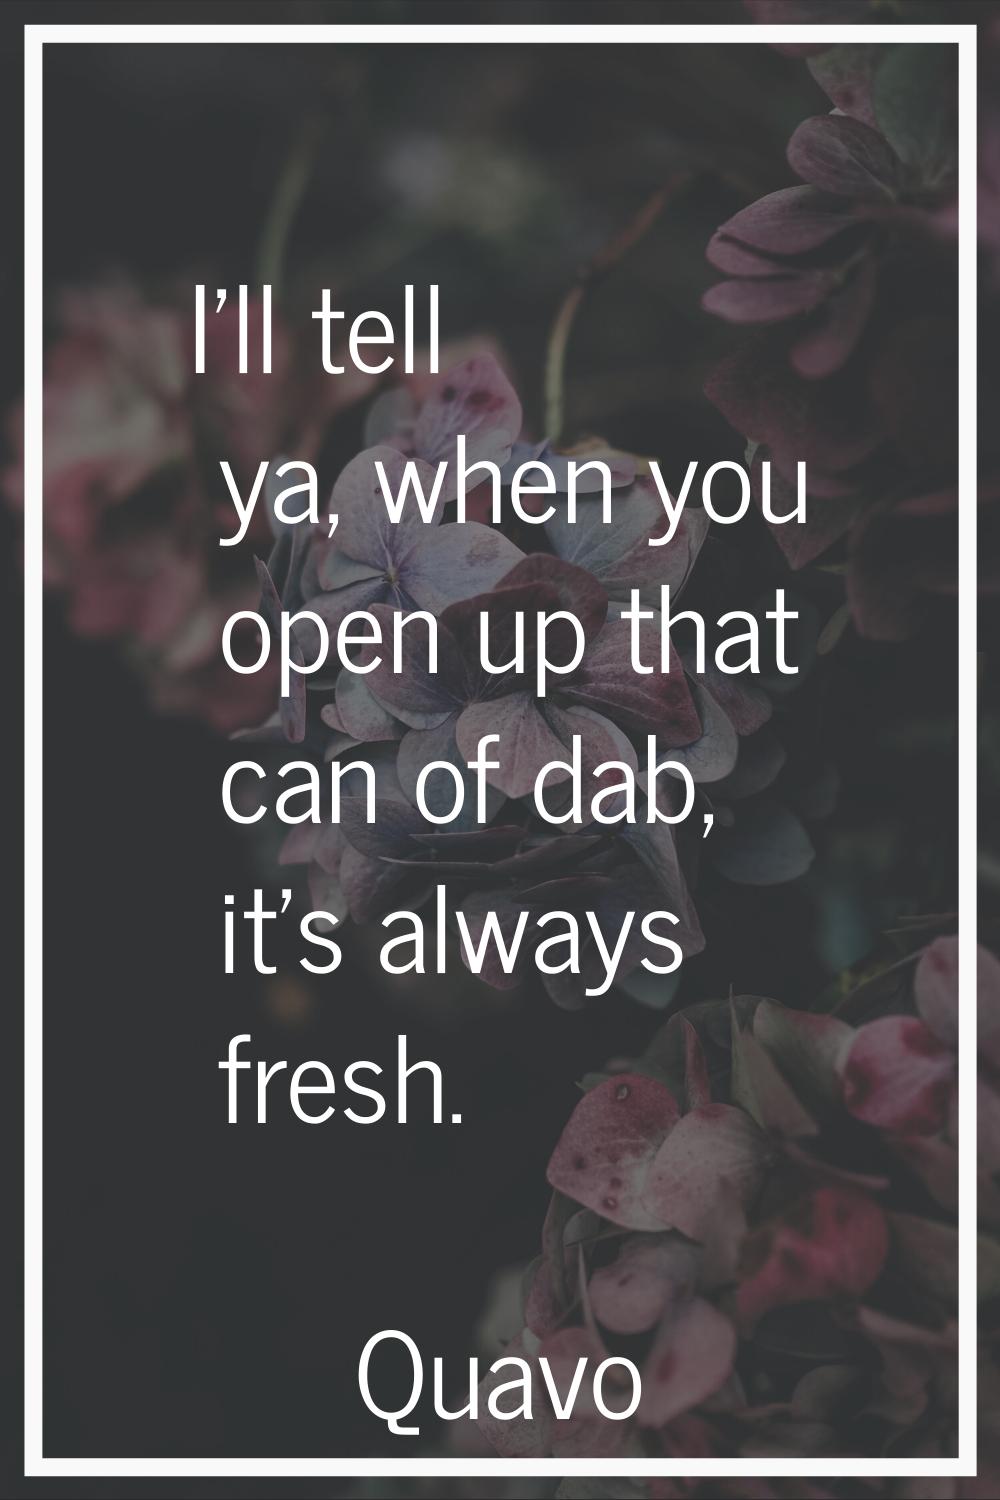 I'll tell ya, when you open up that can of dab, it's always fresh.